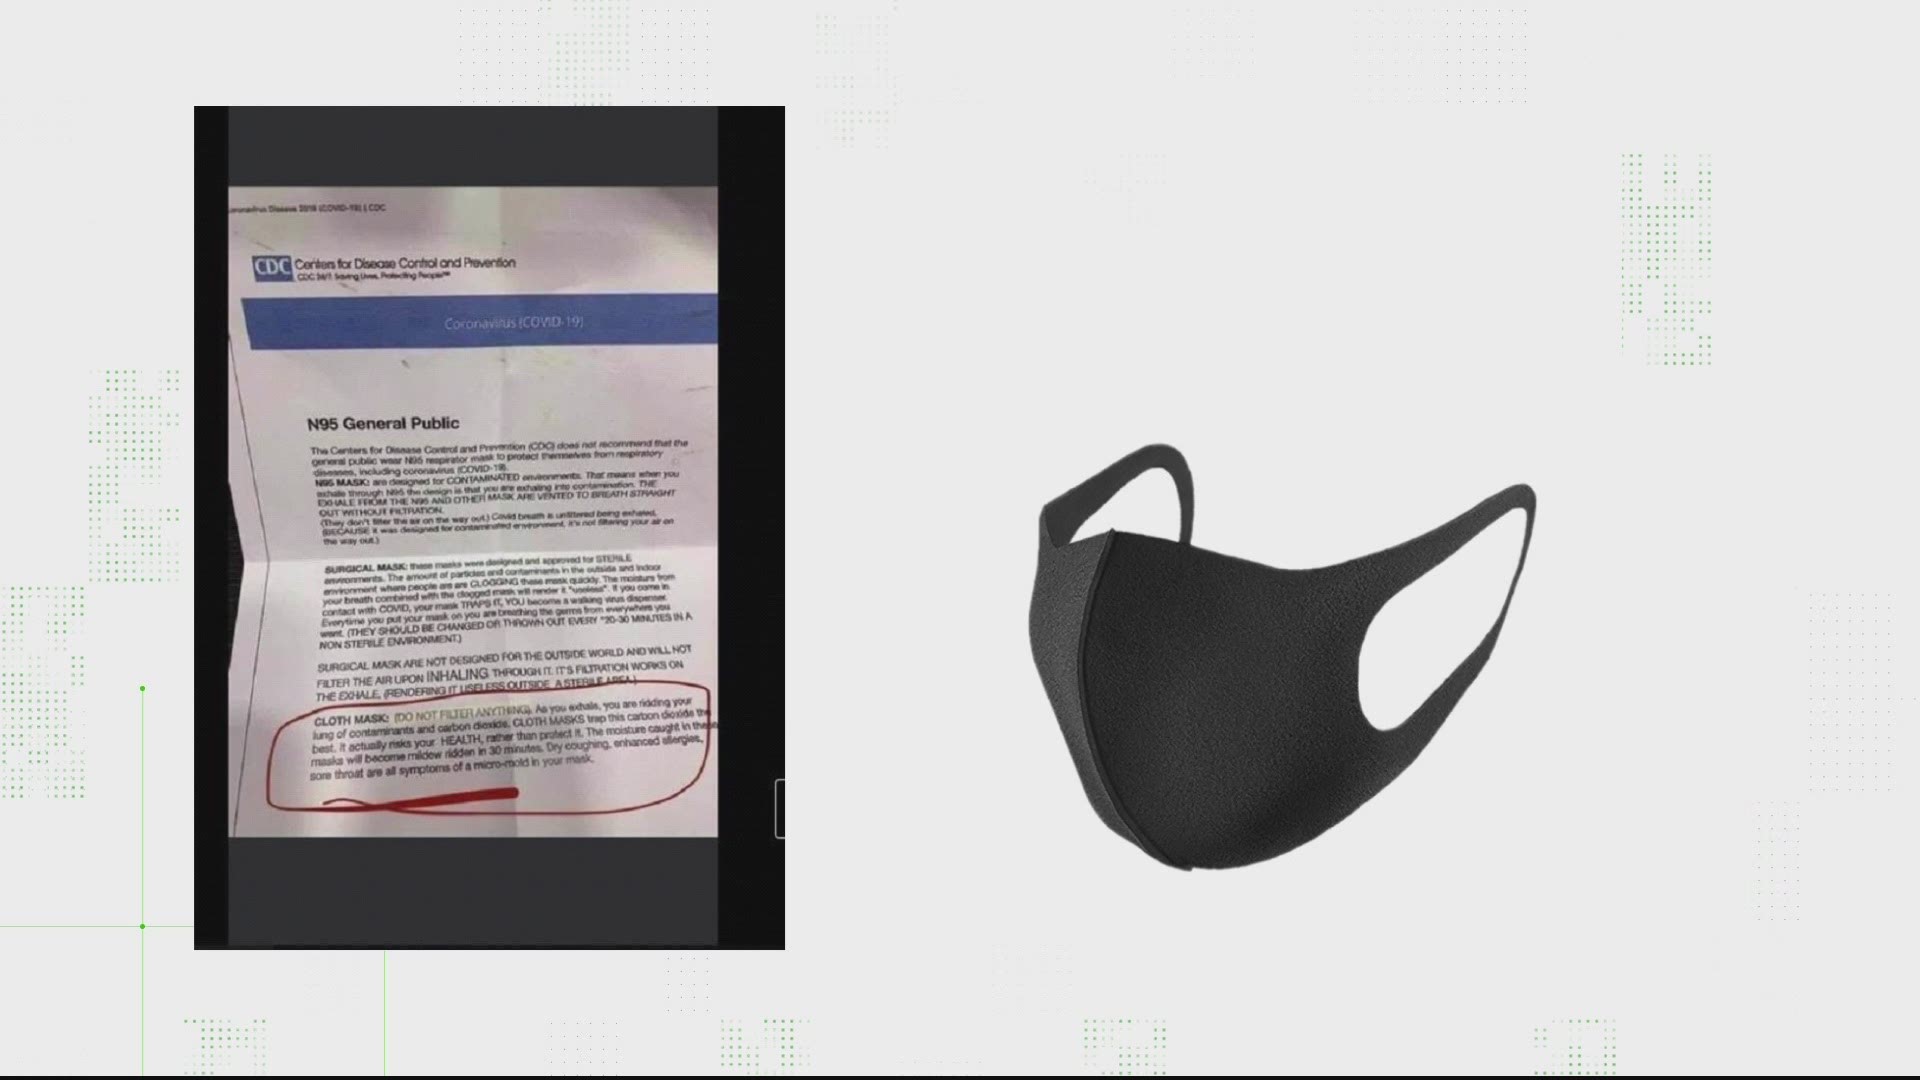 There is a post circulating on social media that claims the CDC has a notice warning about cloth facemasks.